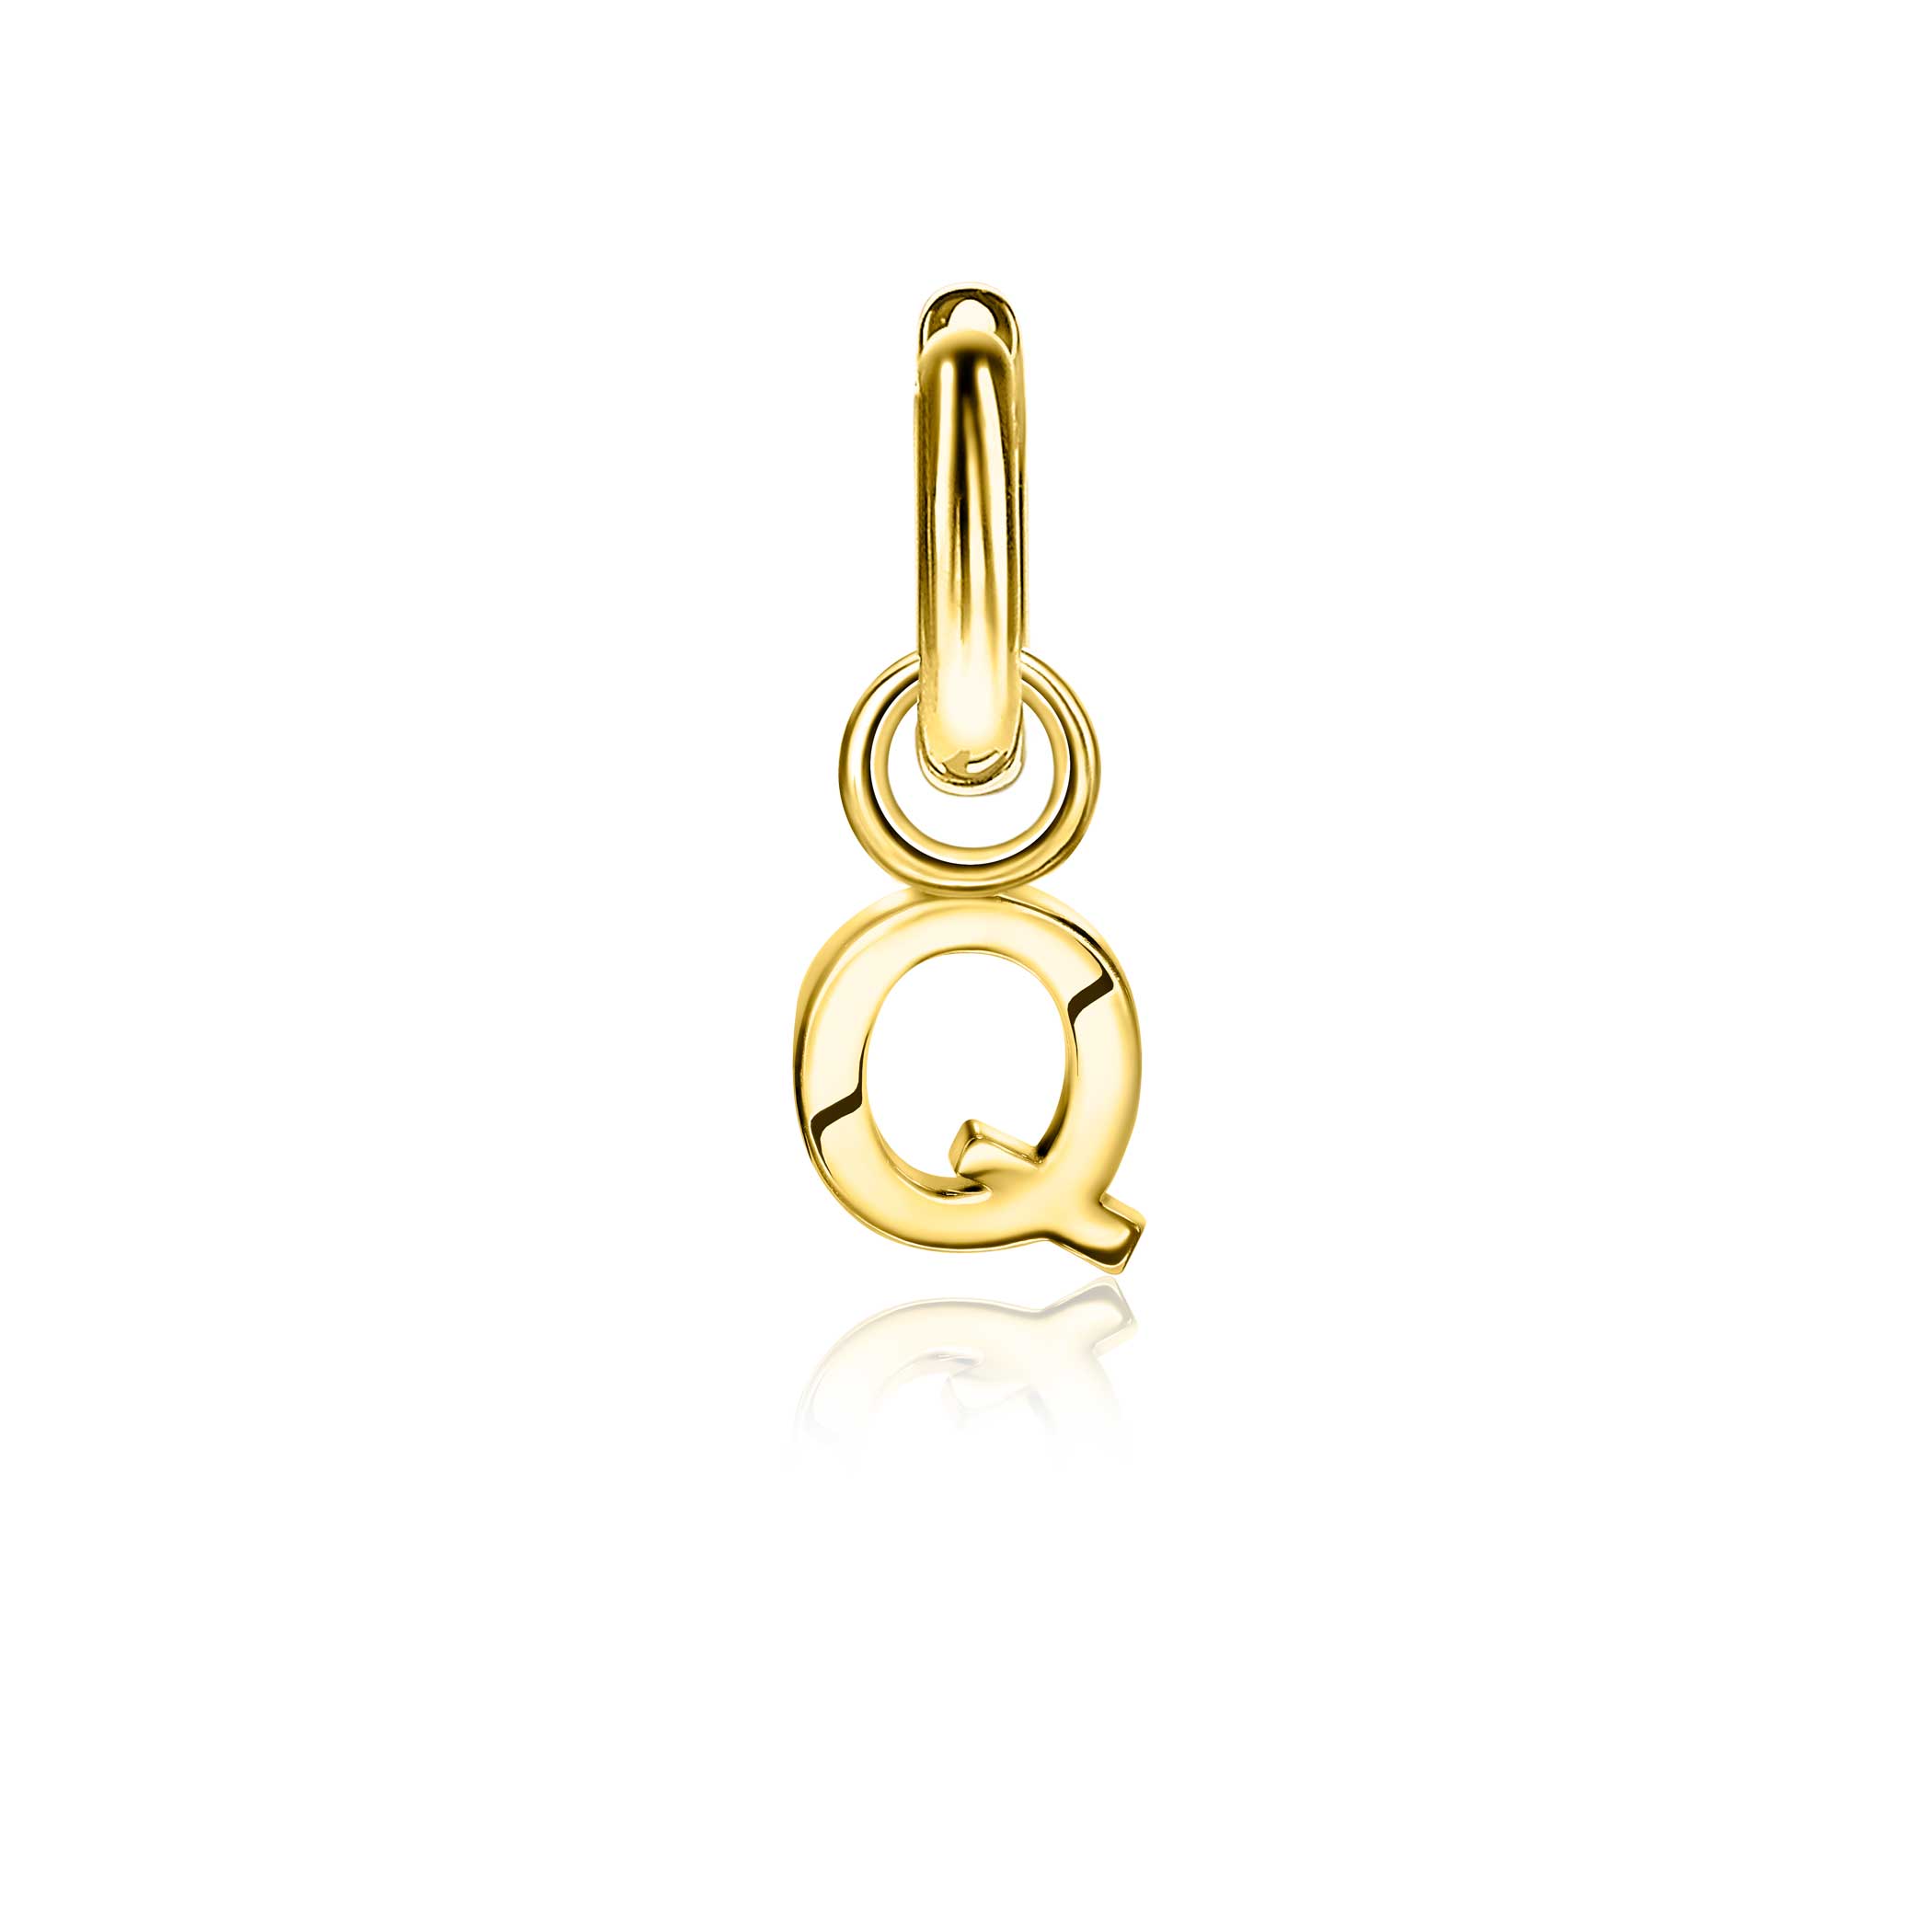 ZINZI Gold Plated Letter Earrings Pendant Q price per piece ZICH2145Q (excl. hoop earrings)